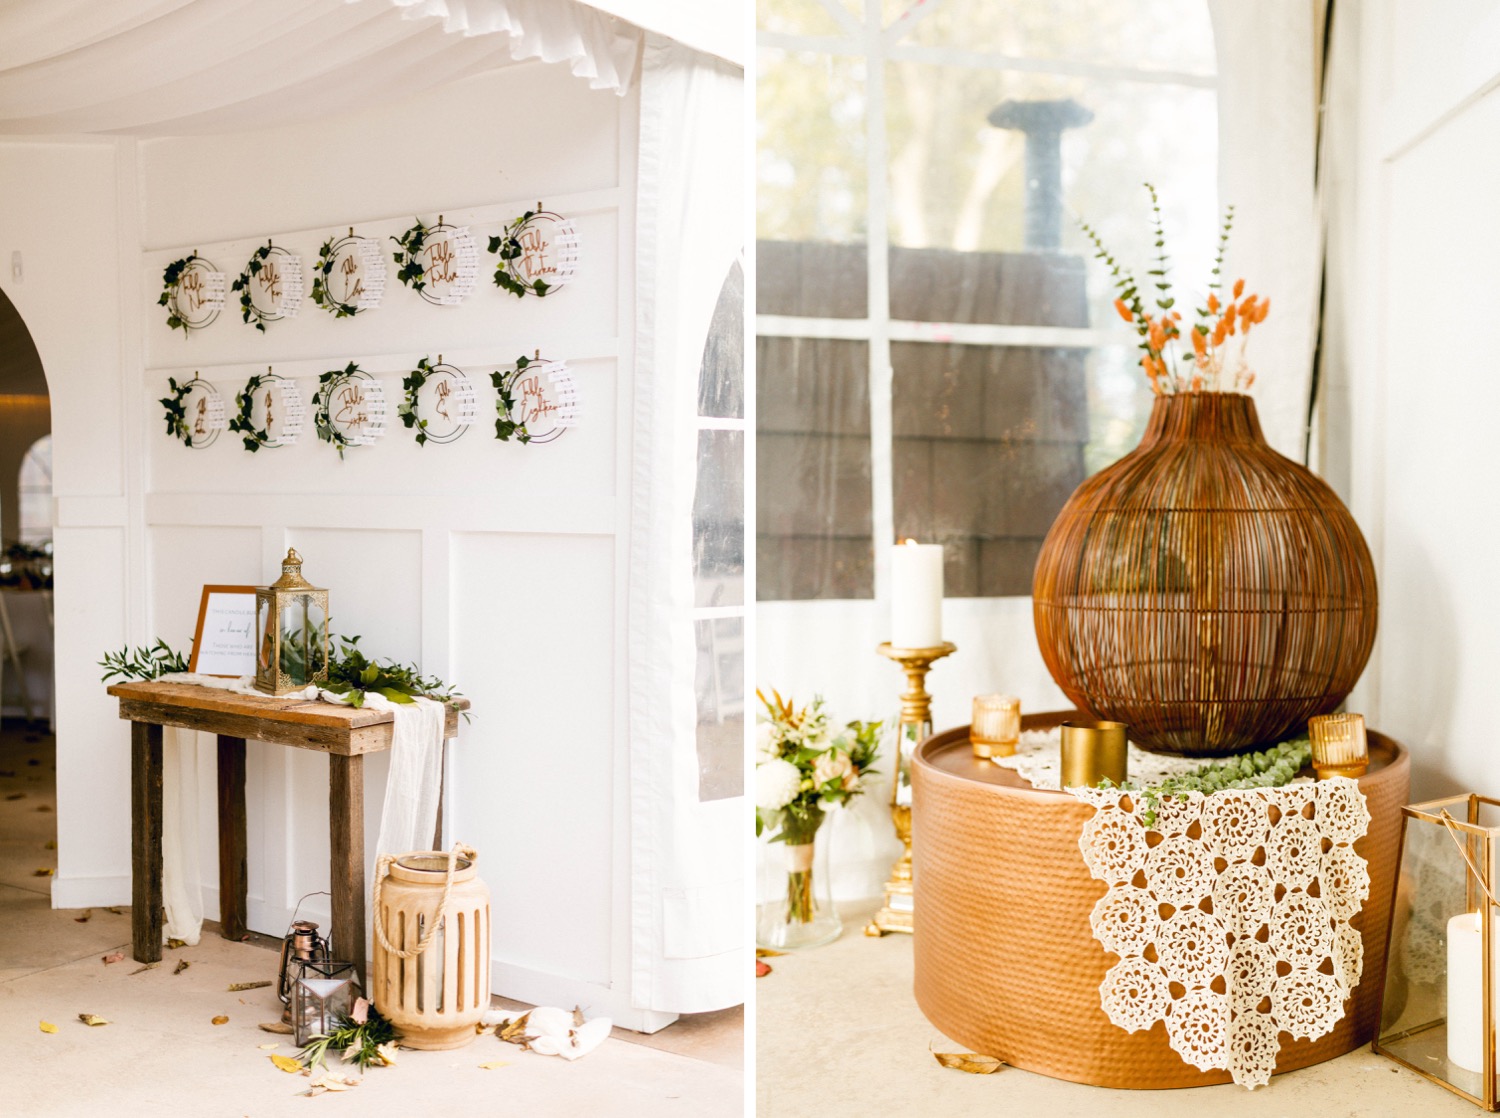 entrance details eclectic fall wedding reception